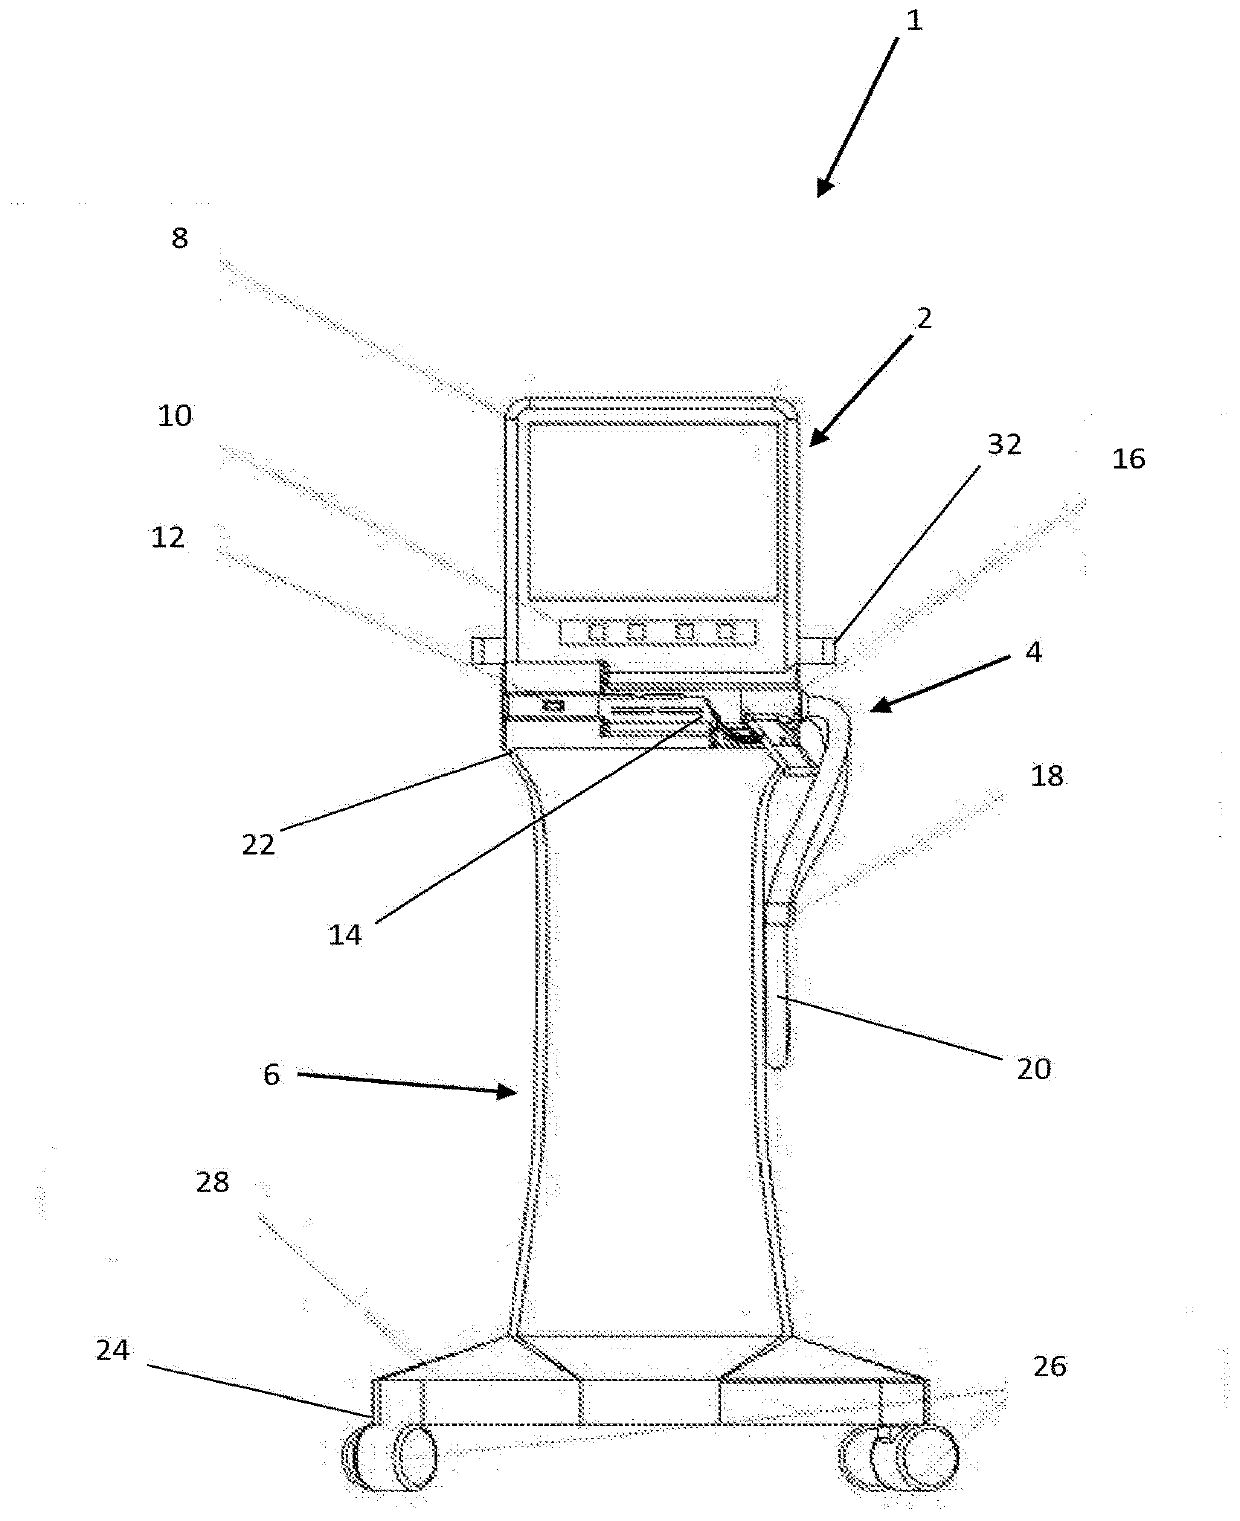 A device for applying nitric oxide to a treatment area